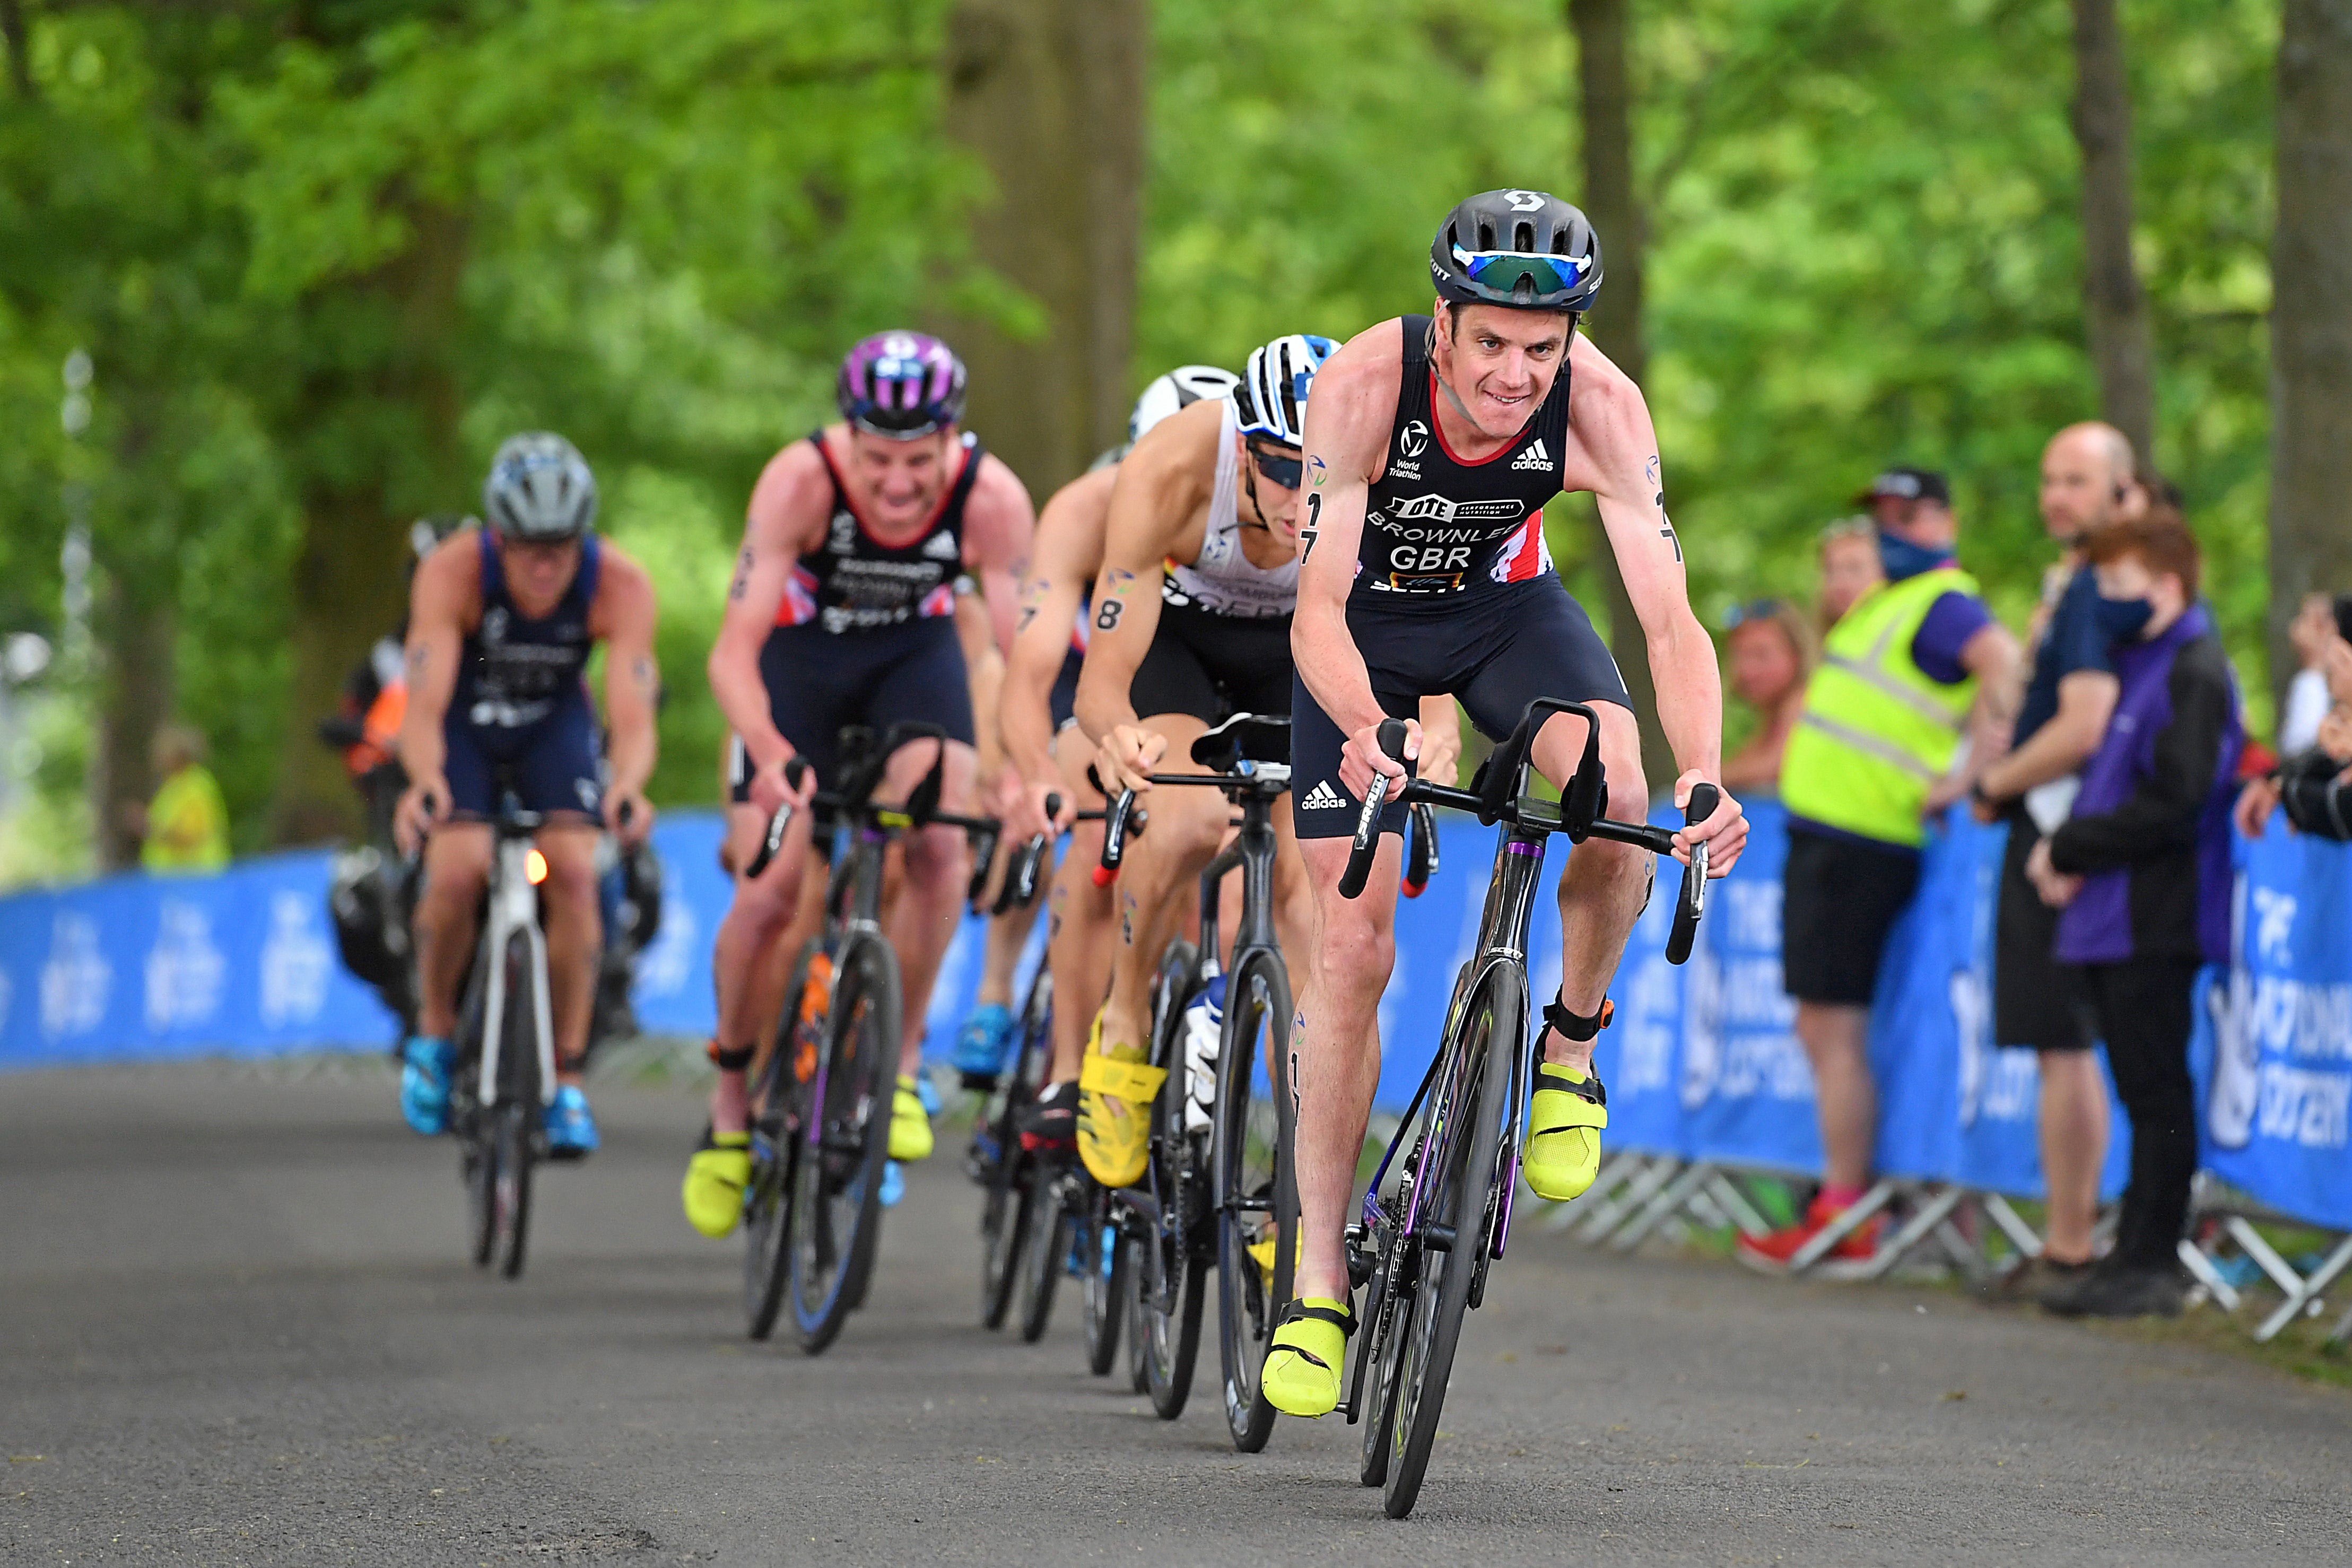 Jonny Brownlee is searching for the ‘perfect triathlon’. Photo credit: Andy Chubb